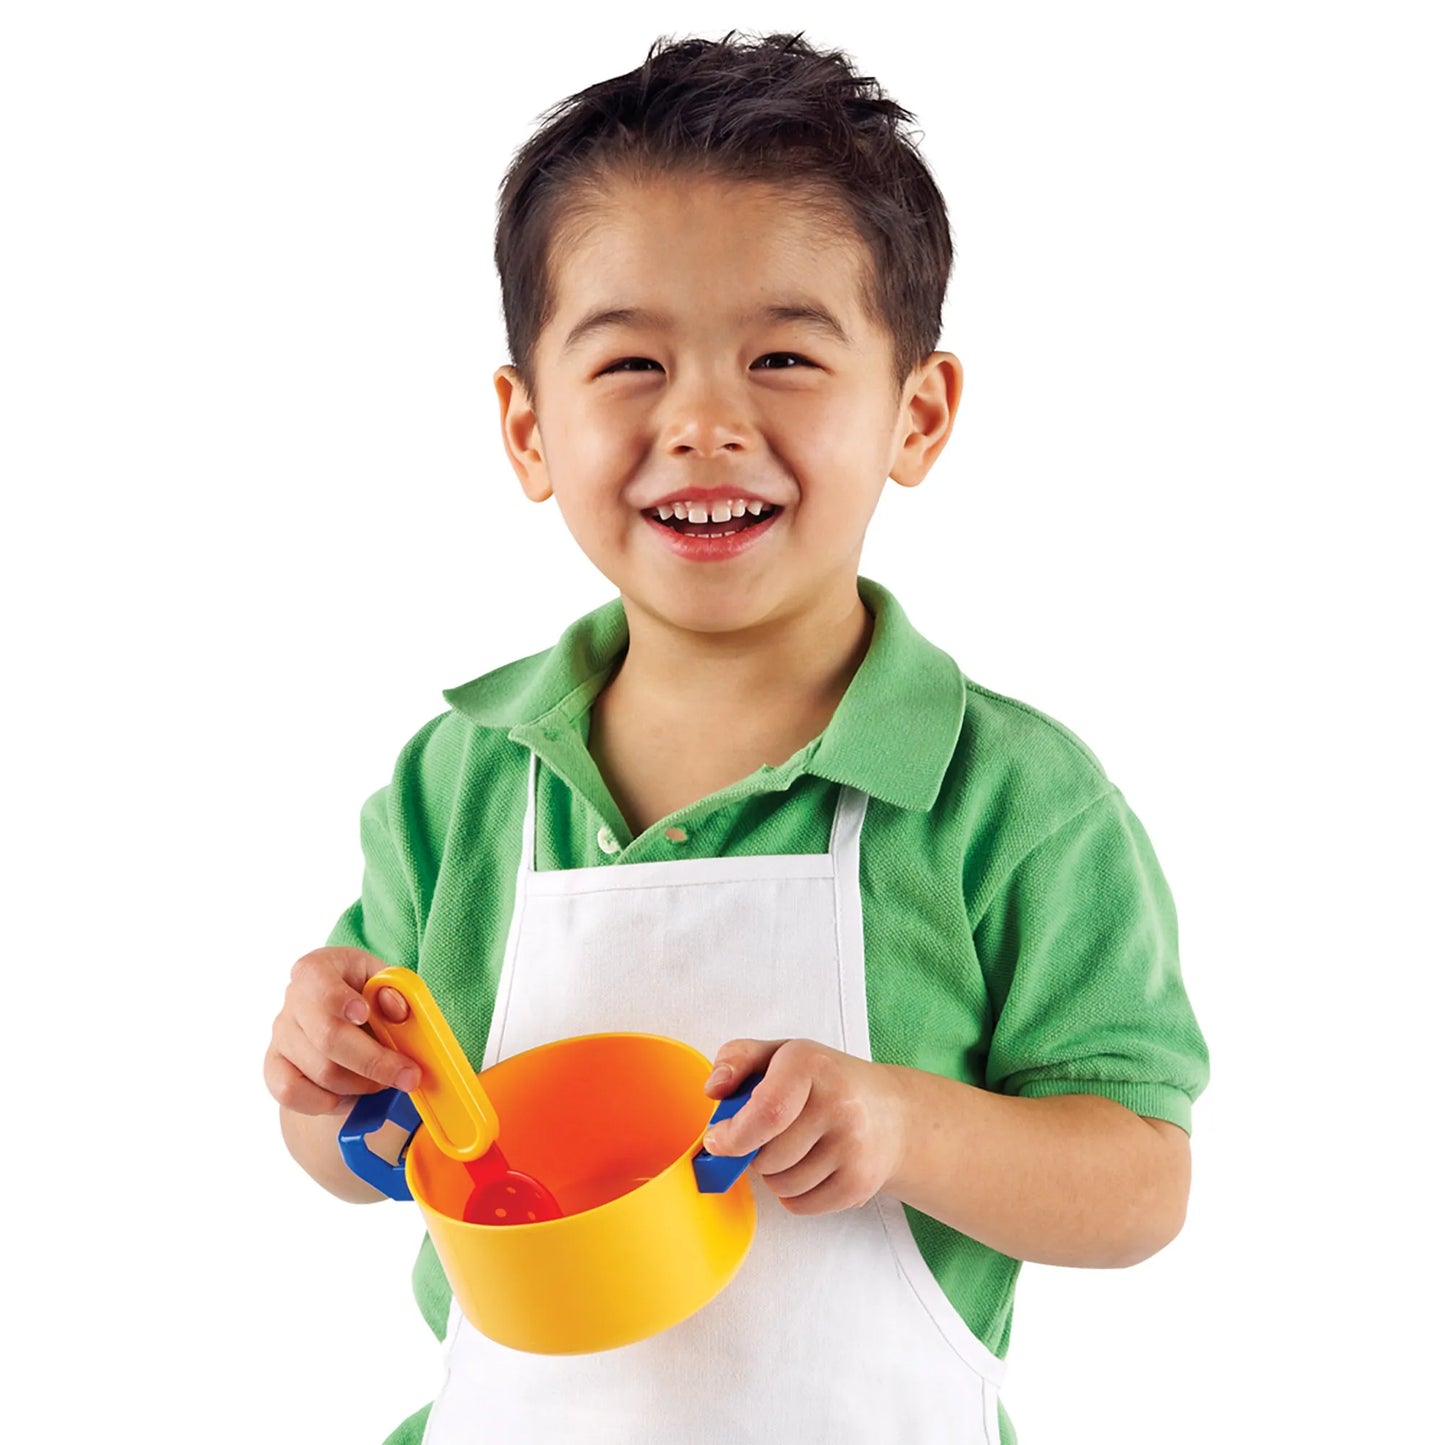 Learning Resources Pretend & Play Cooking Set